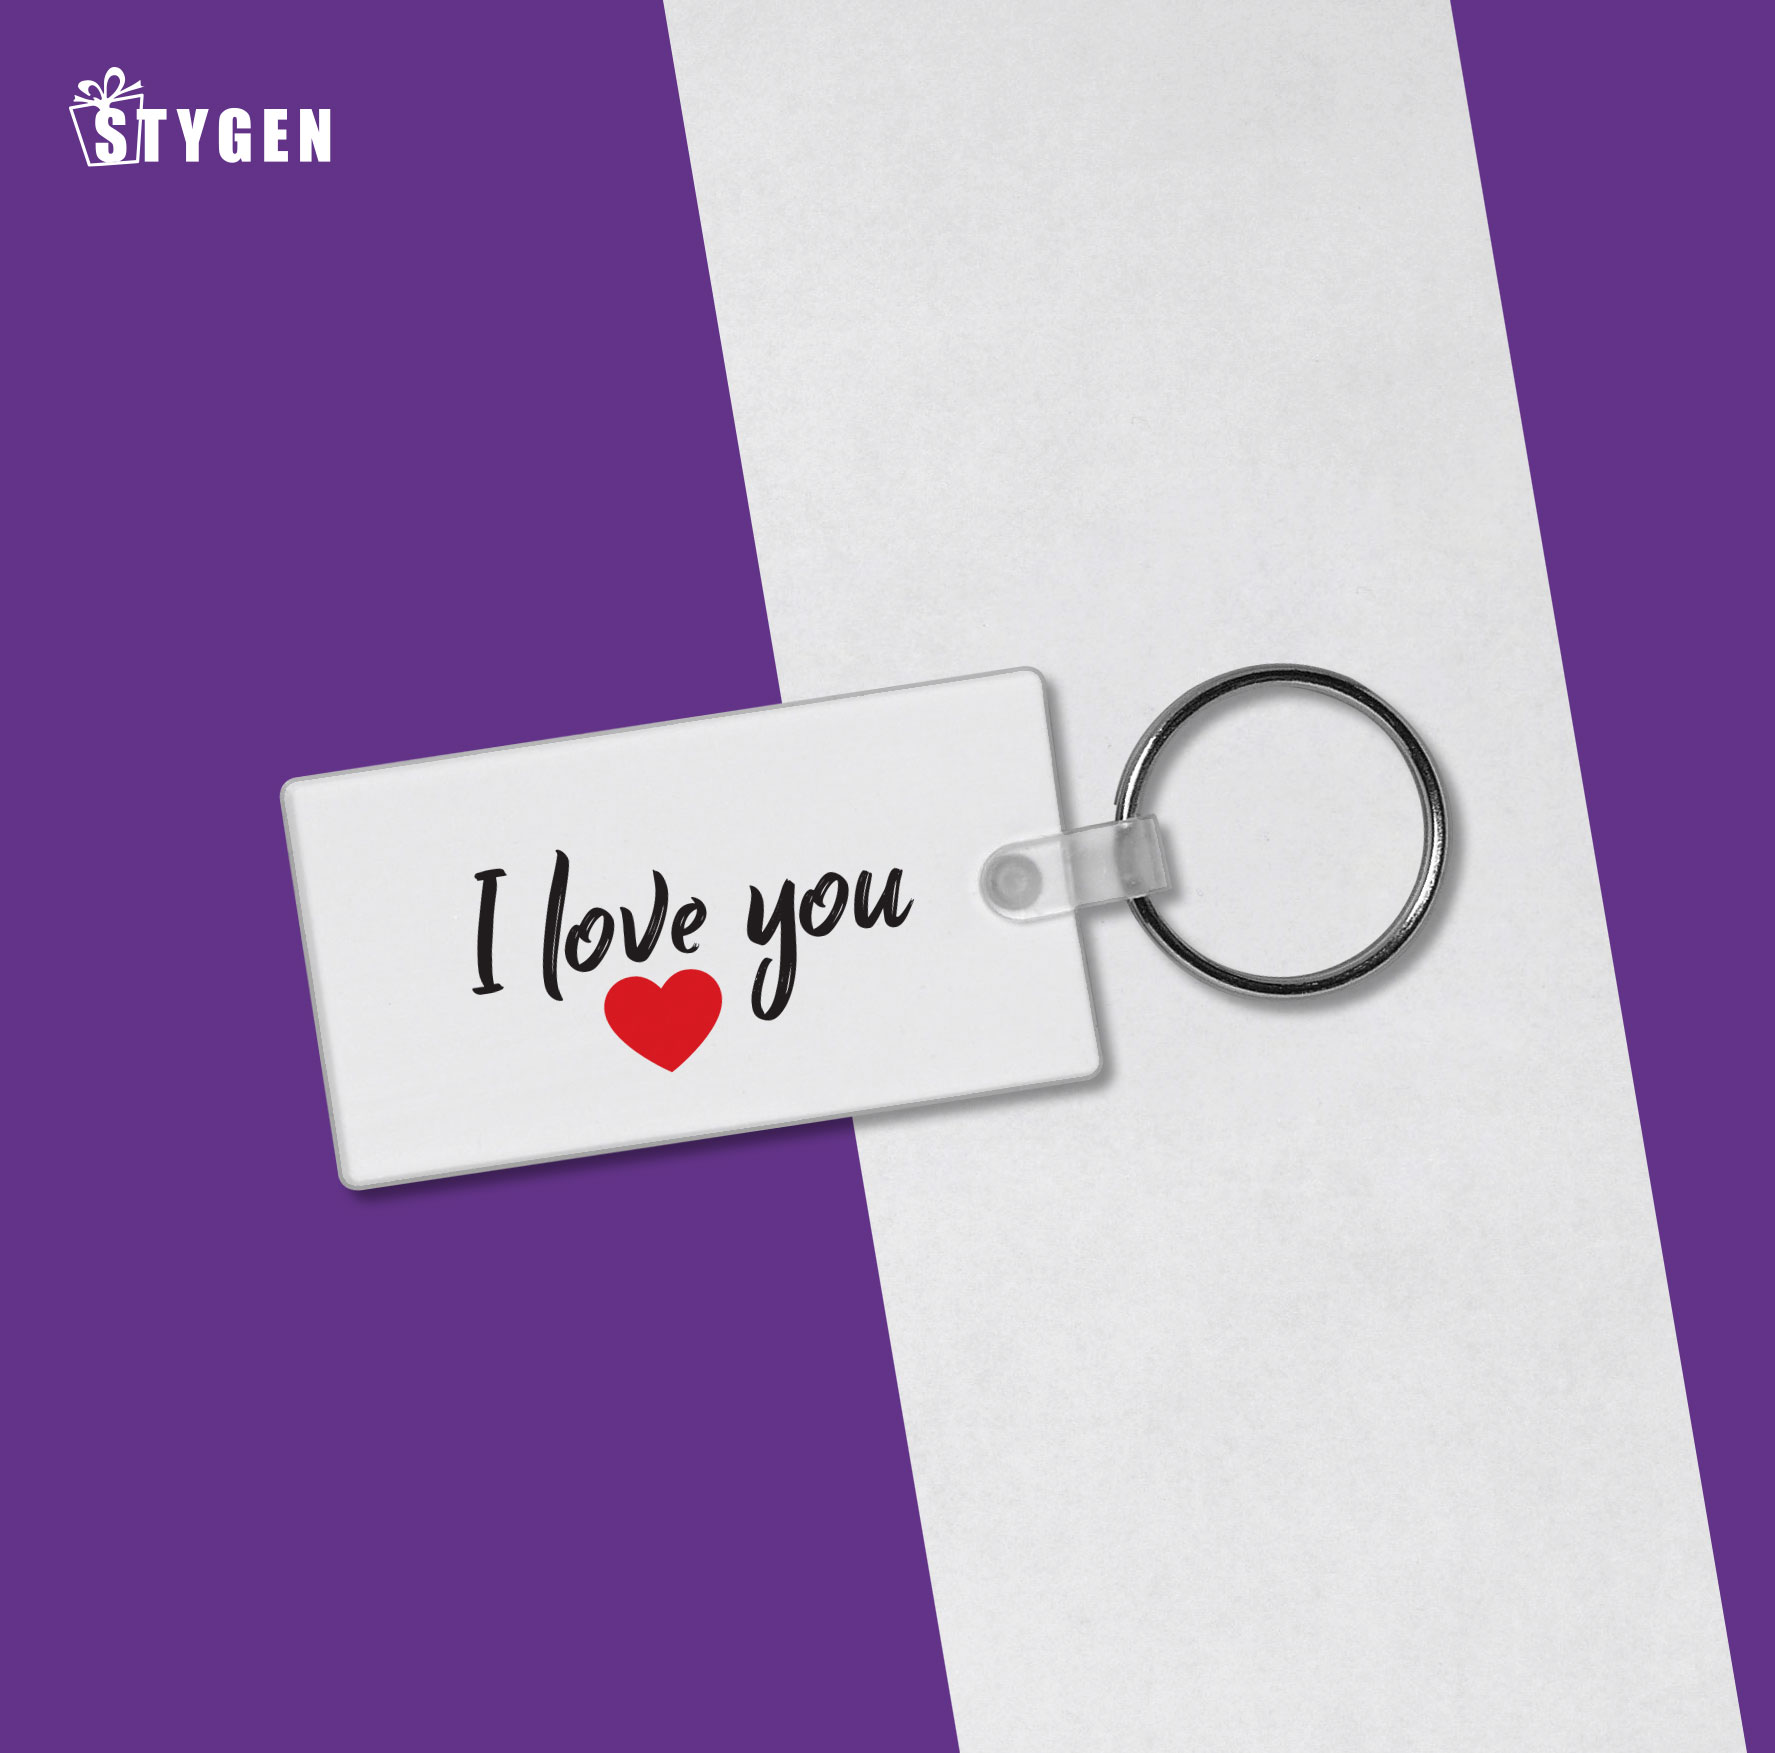 Personalized Acrylic Keyring for your loved one